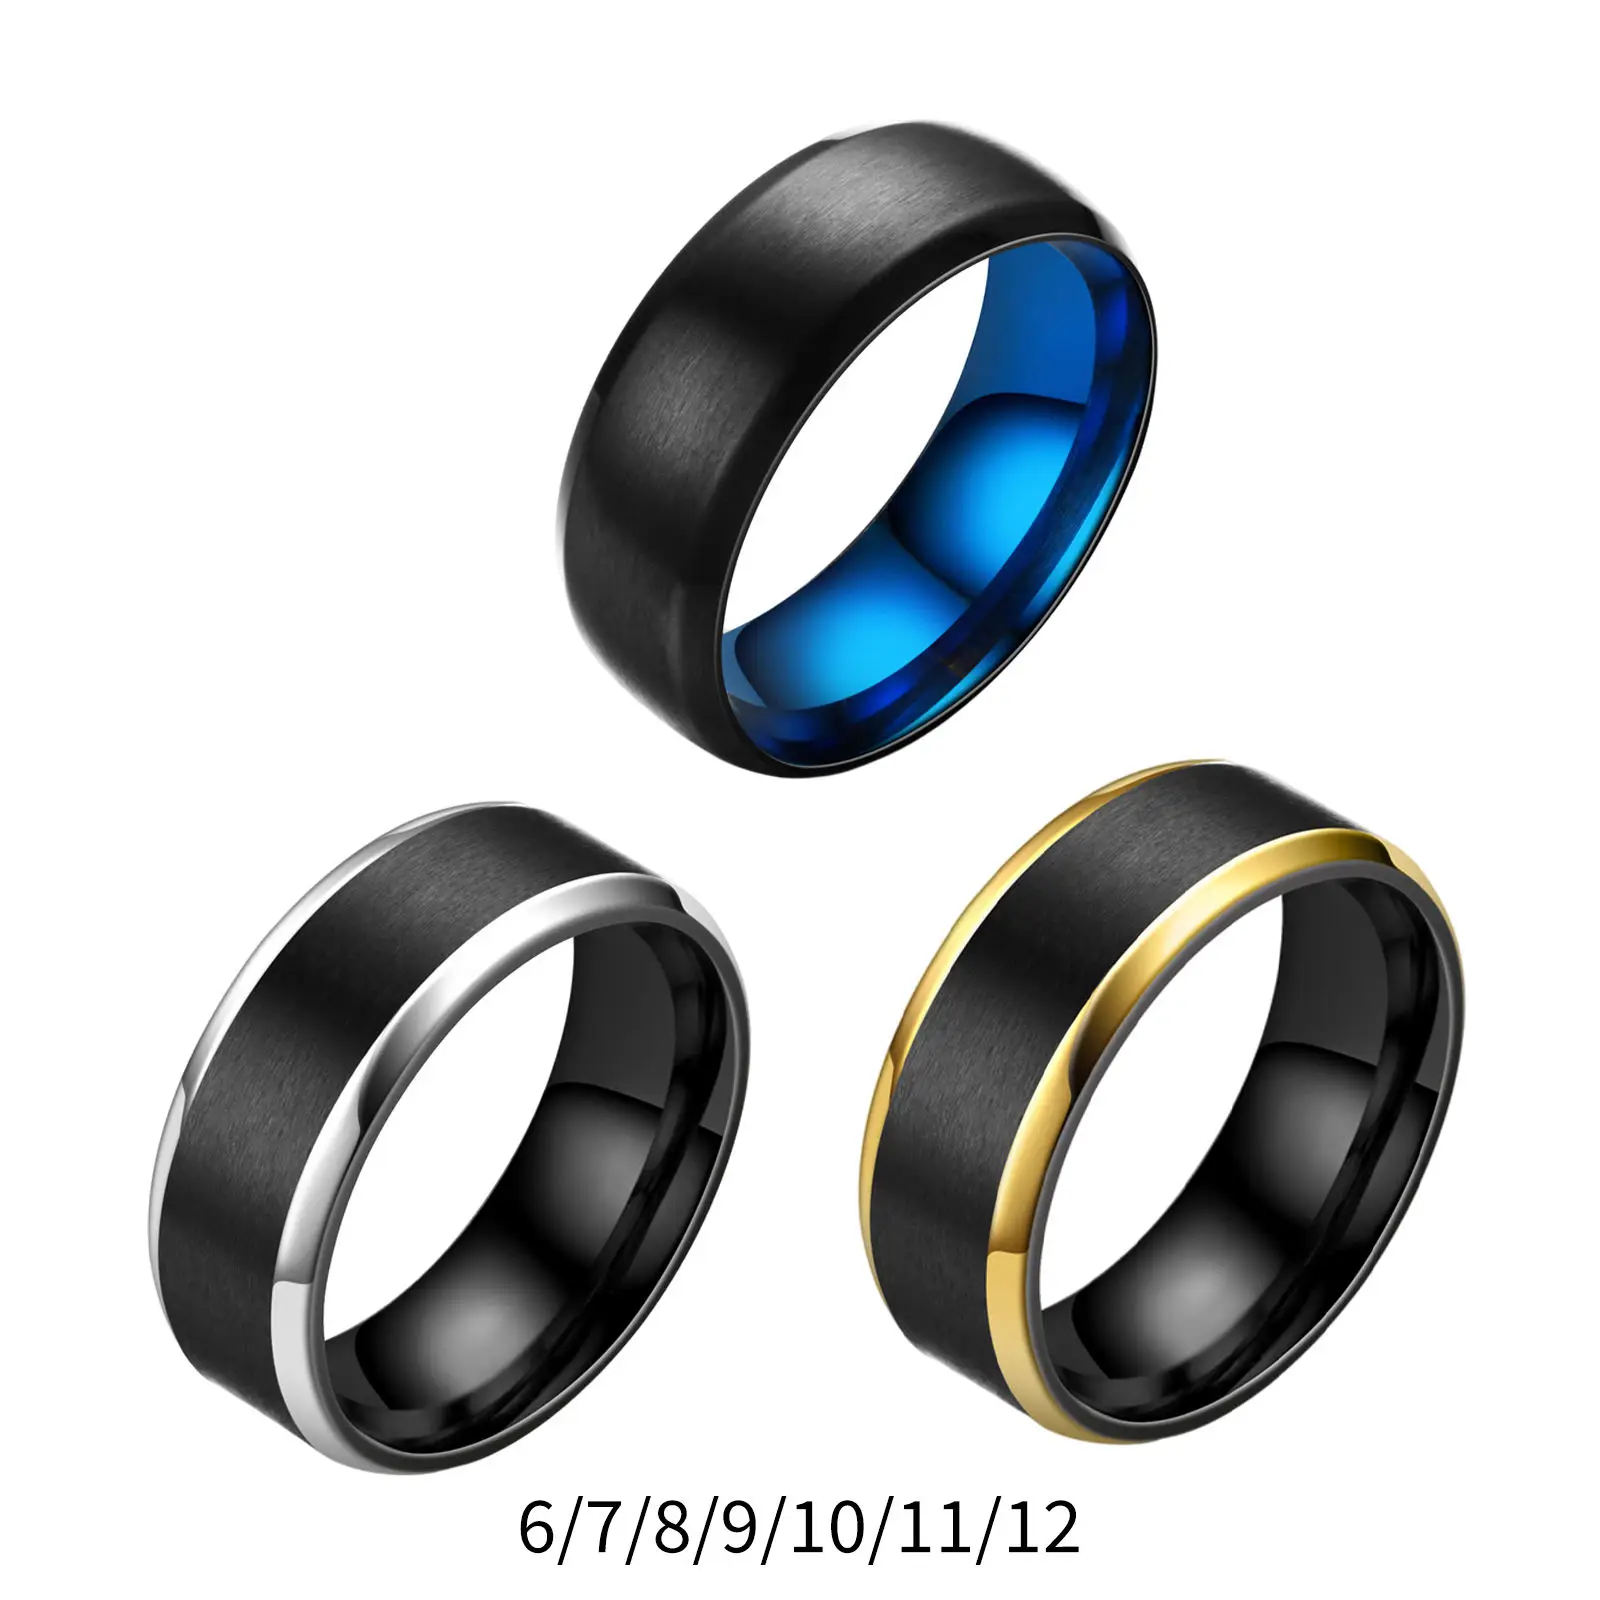 Stainless Steel Rings with Engraving Stress Relieving for Anniversary Gifts